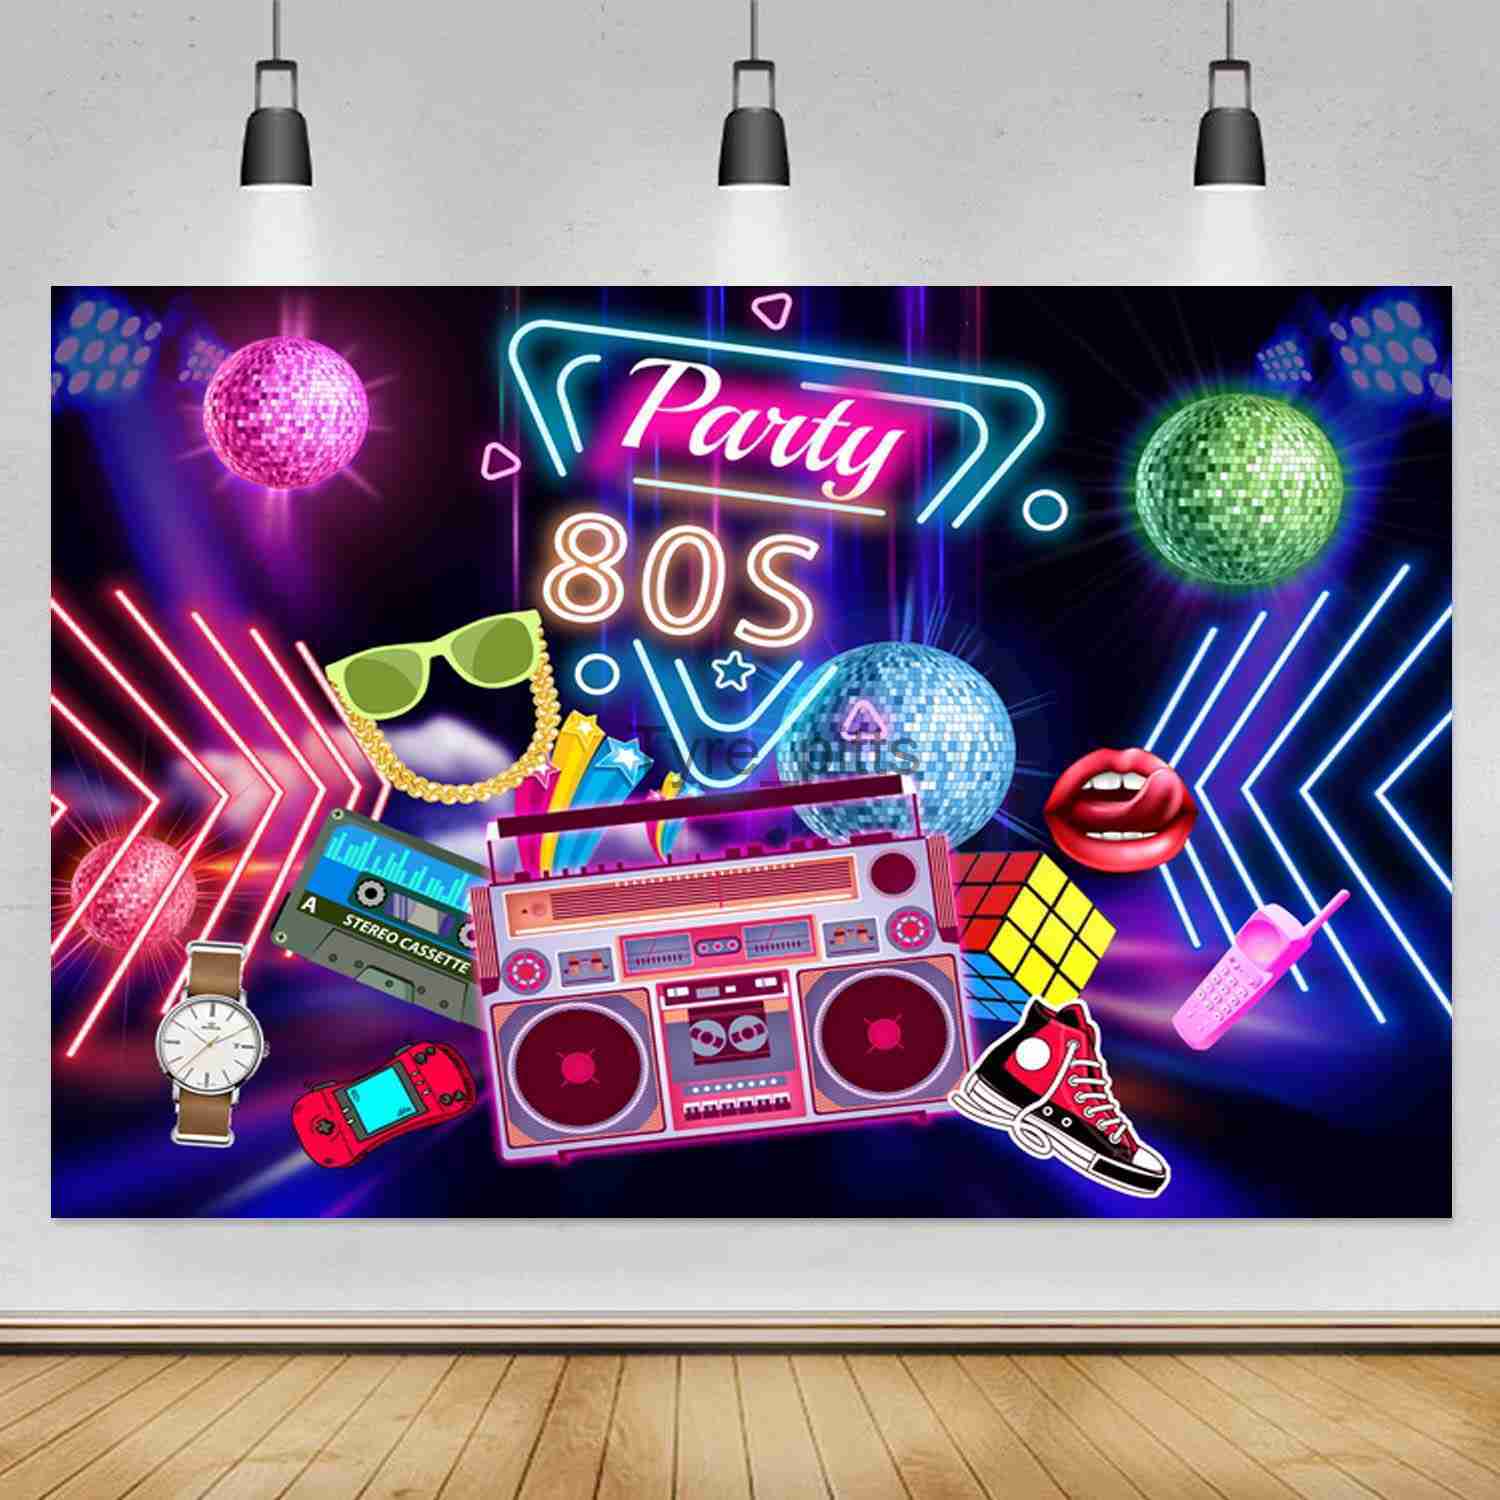 Background Material 80s Party Background Disco Theme Retro Hip Hop Music Broadcast Photography Background Logo 1980 Neon Lights 80s Photography Props X0725